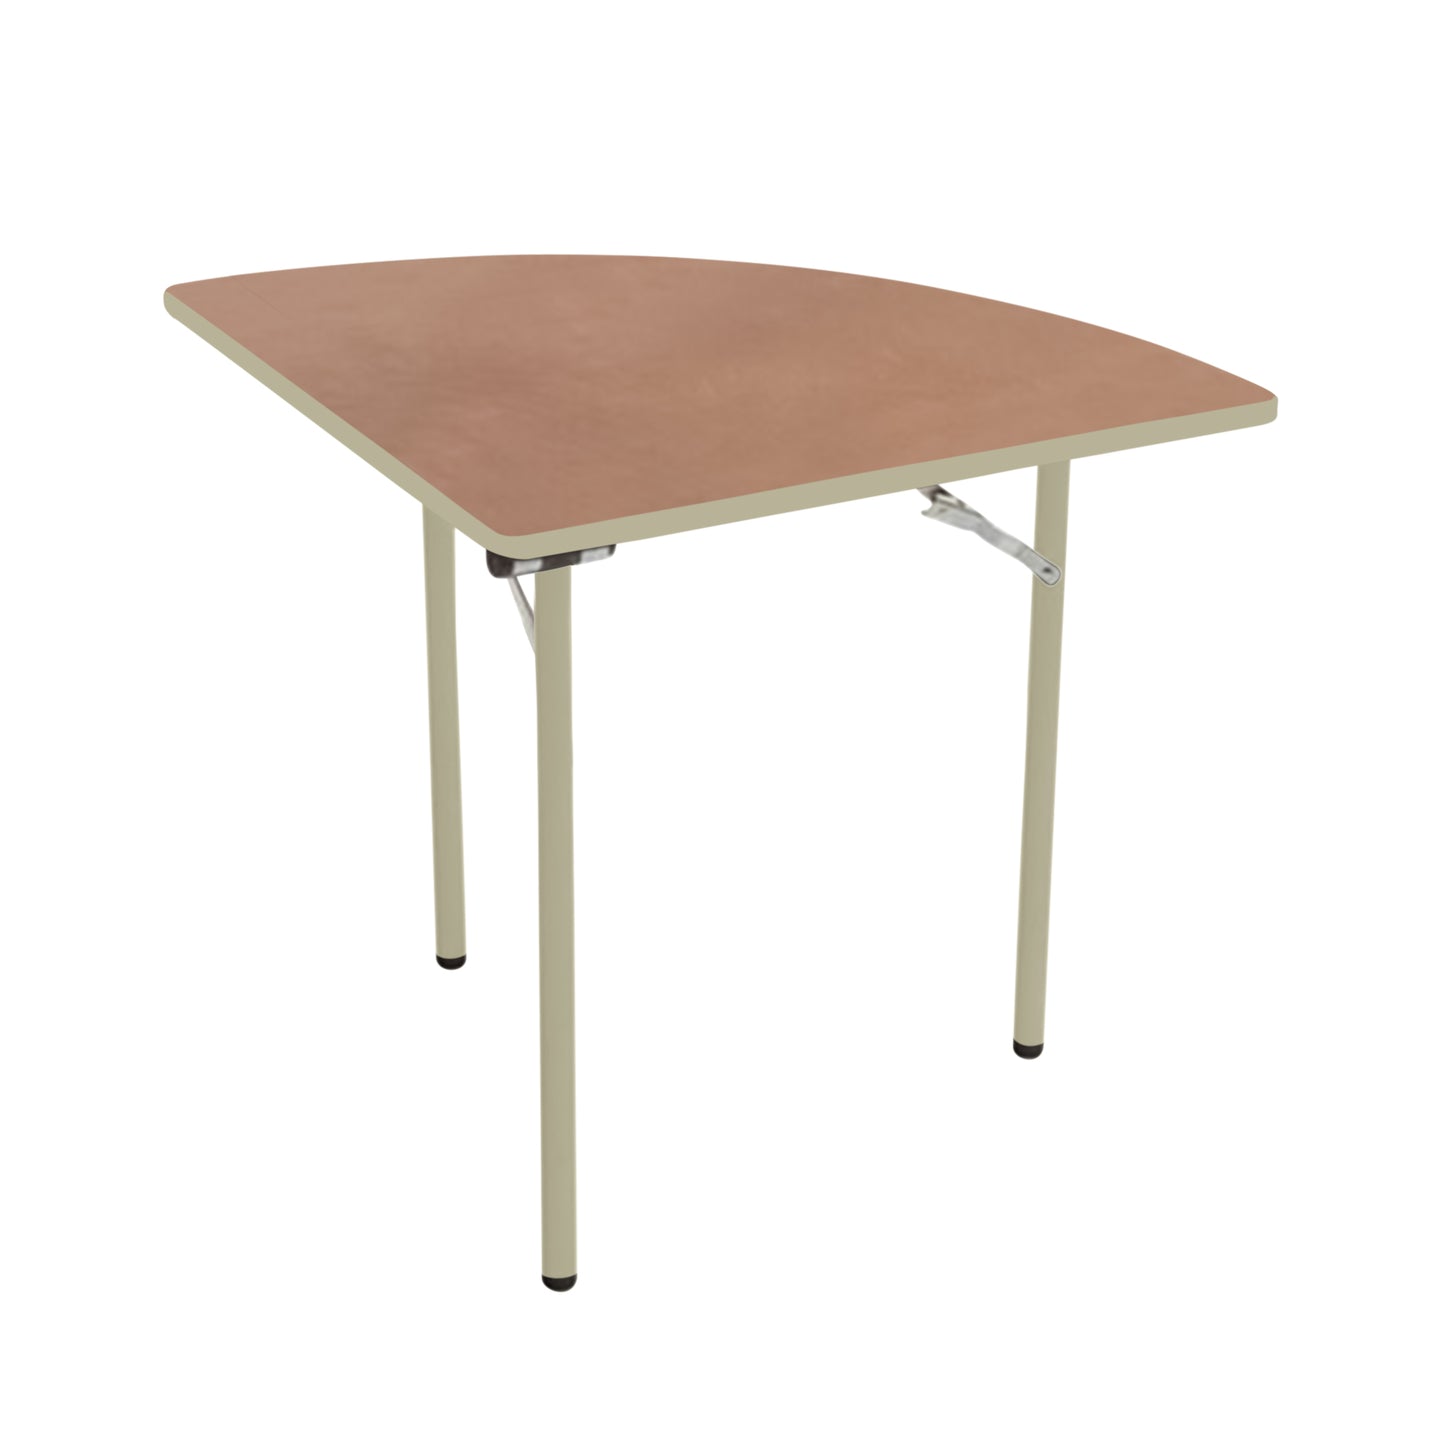 AmTab Folding Table - Plywood Stained and Sealed - Vinyl T-Molding Edge - Quarter Round - Quarter 48" Diameter x 29"H  (AmTab AMT-QR48PM)